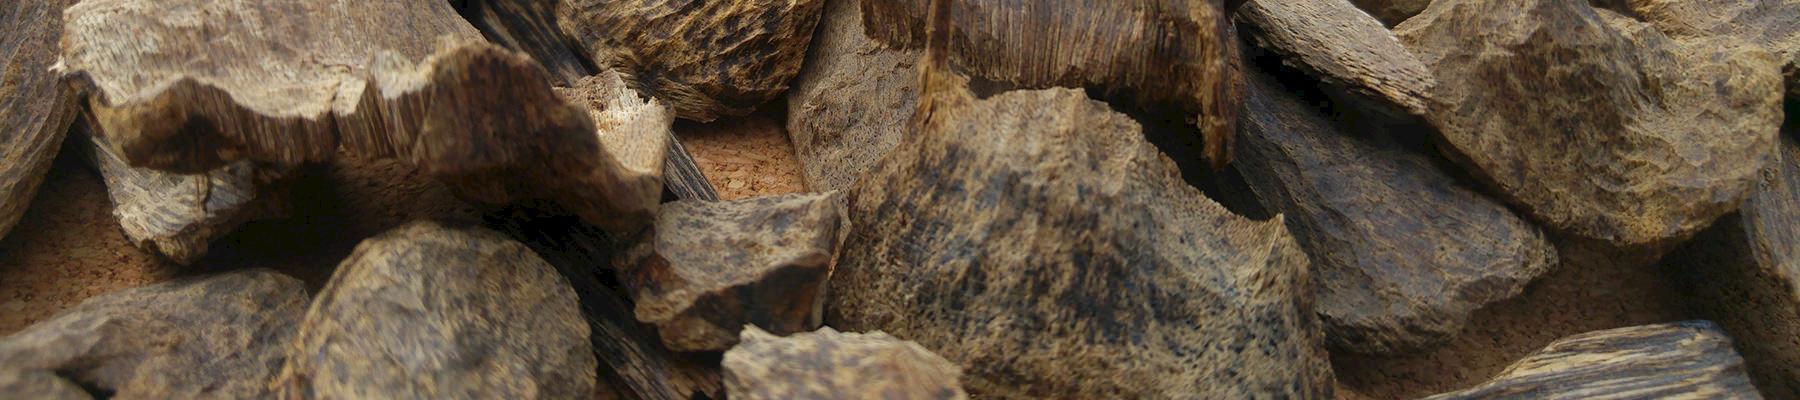 Pieces of agarwood ready for sale © Agarwood for Life / CC Generic 2.0